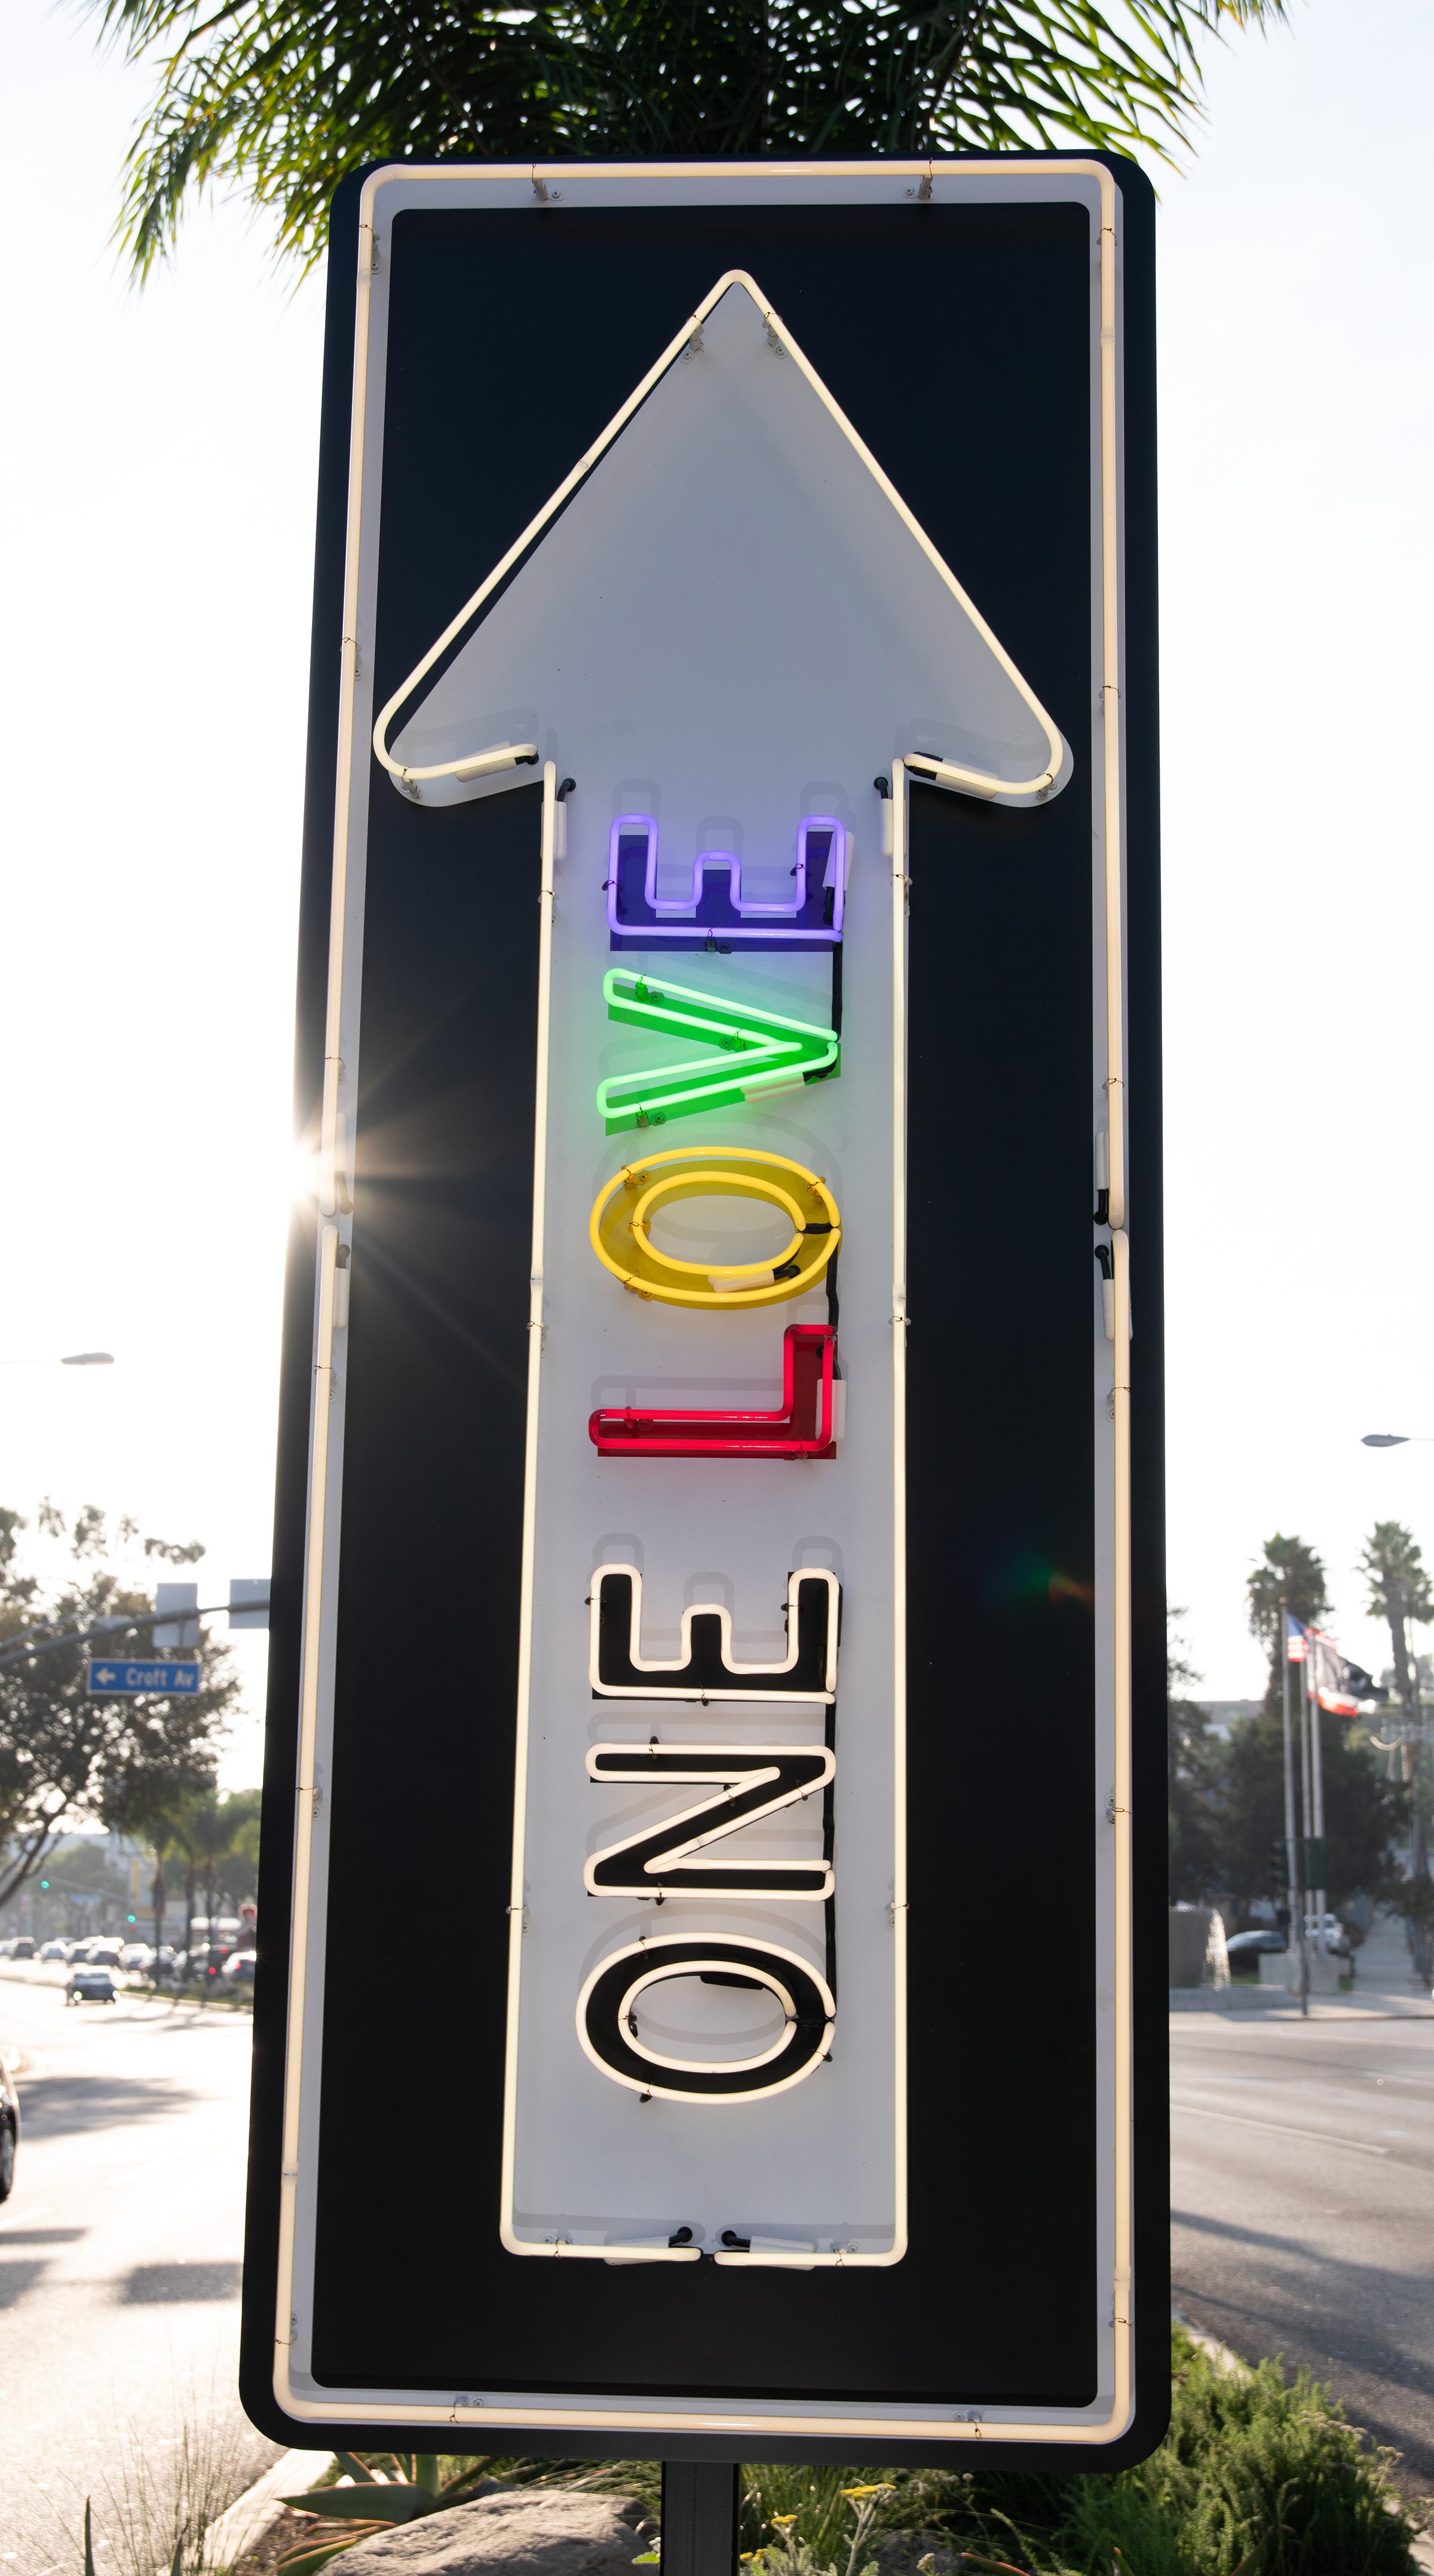 "One Love Pulsating" - Neon Small -Contemporary Street Sign Sculpture - Mixed Media Art by Scott Froschauer